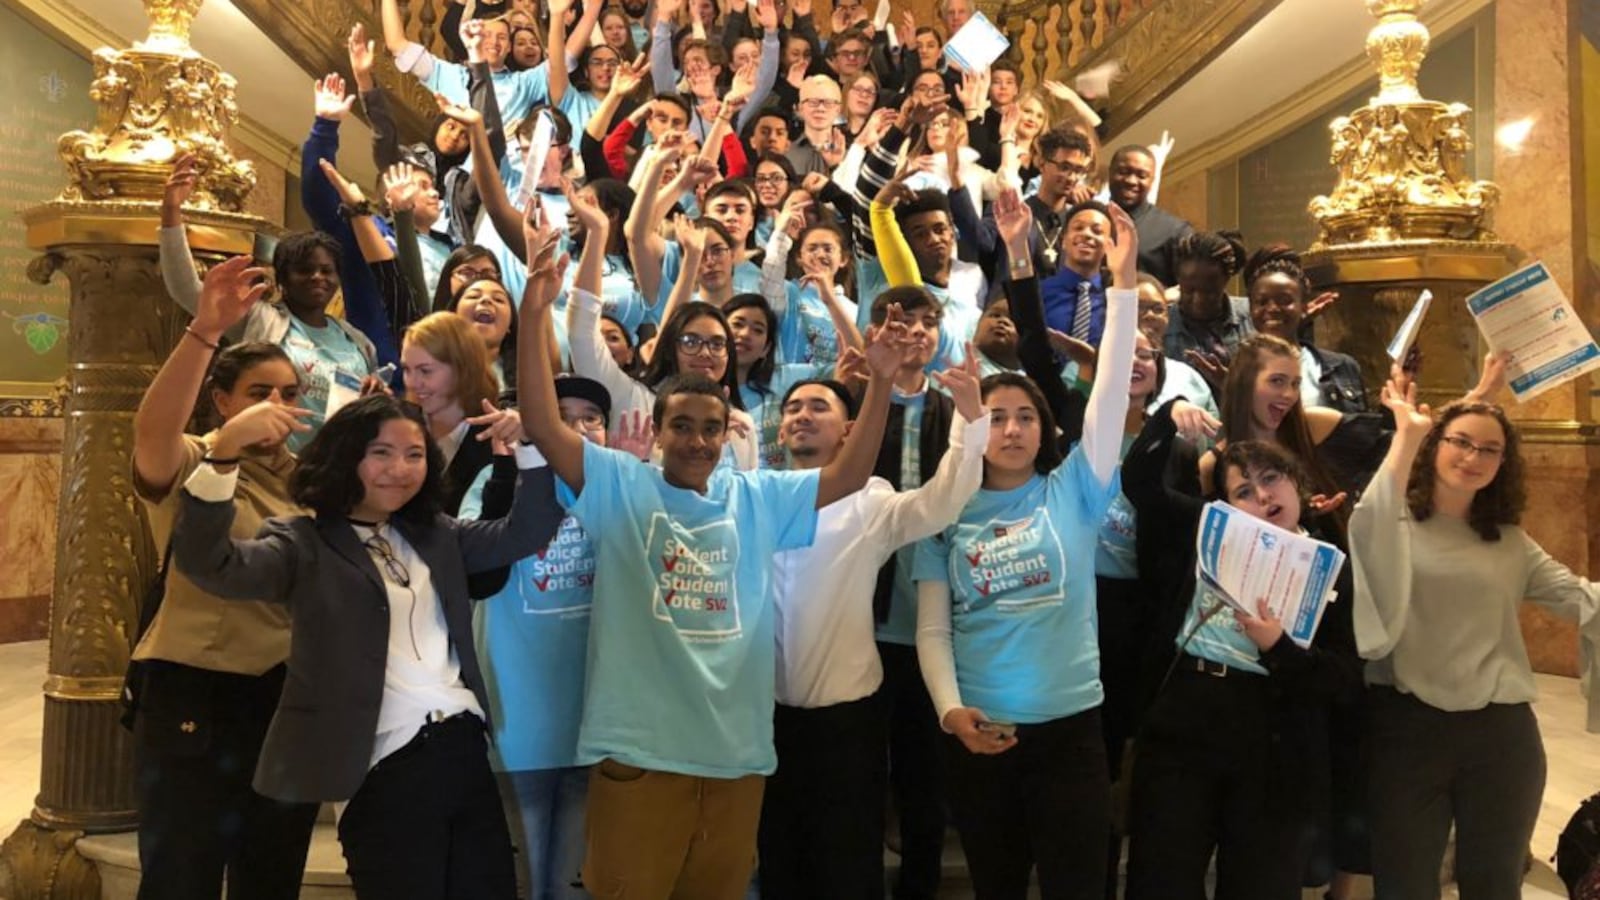 Student activists participate in a lobby day in support of a lower voting age at the Colorado State Capitol in spring 2019.